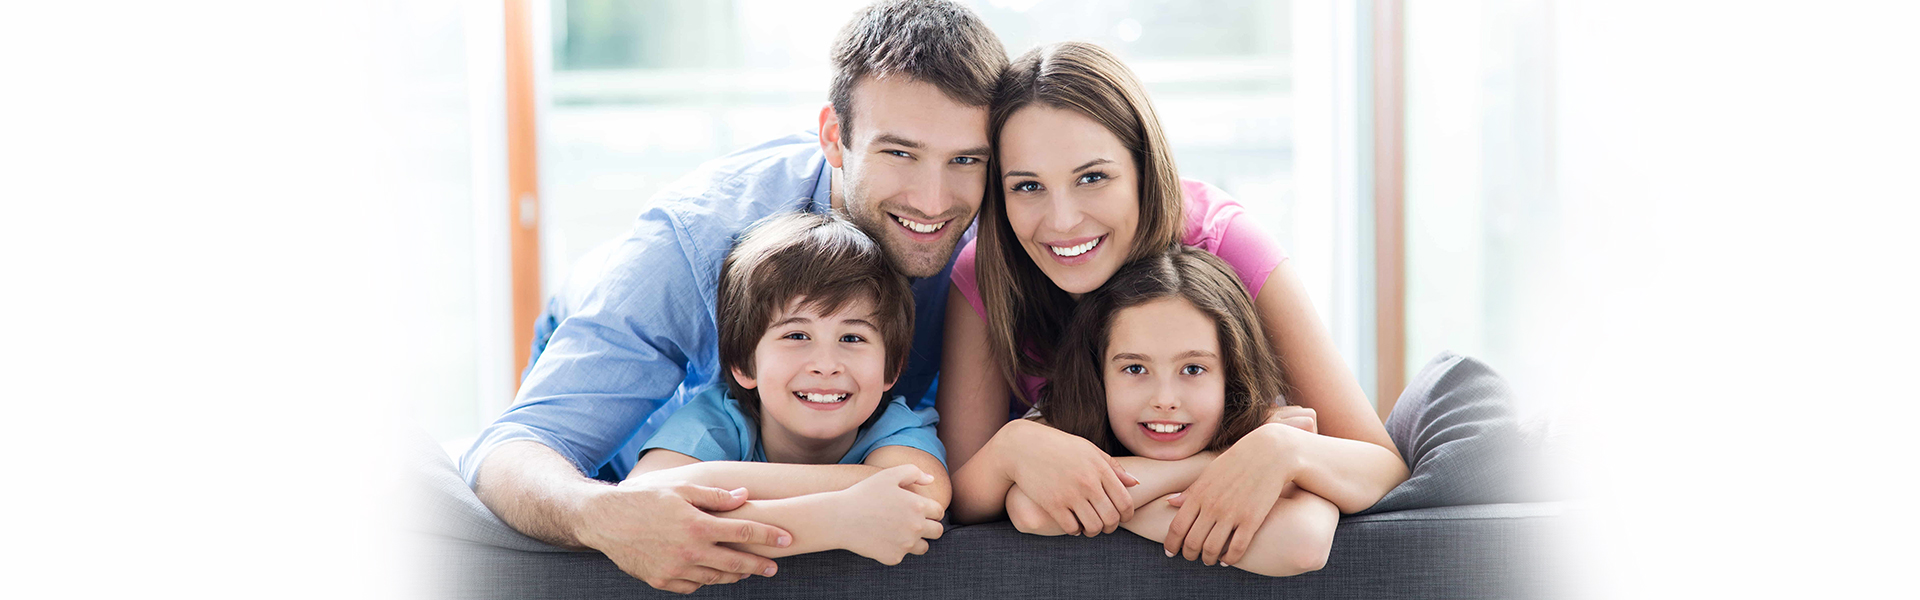 Choosing the Best Dental Care for Your Whole Family